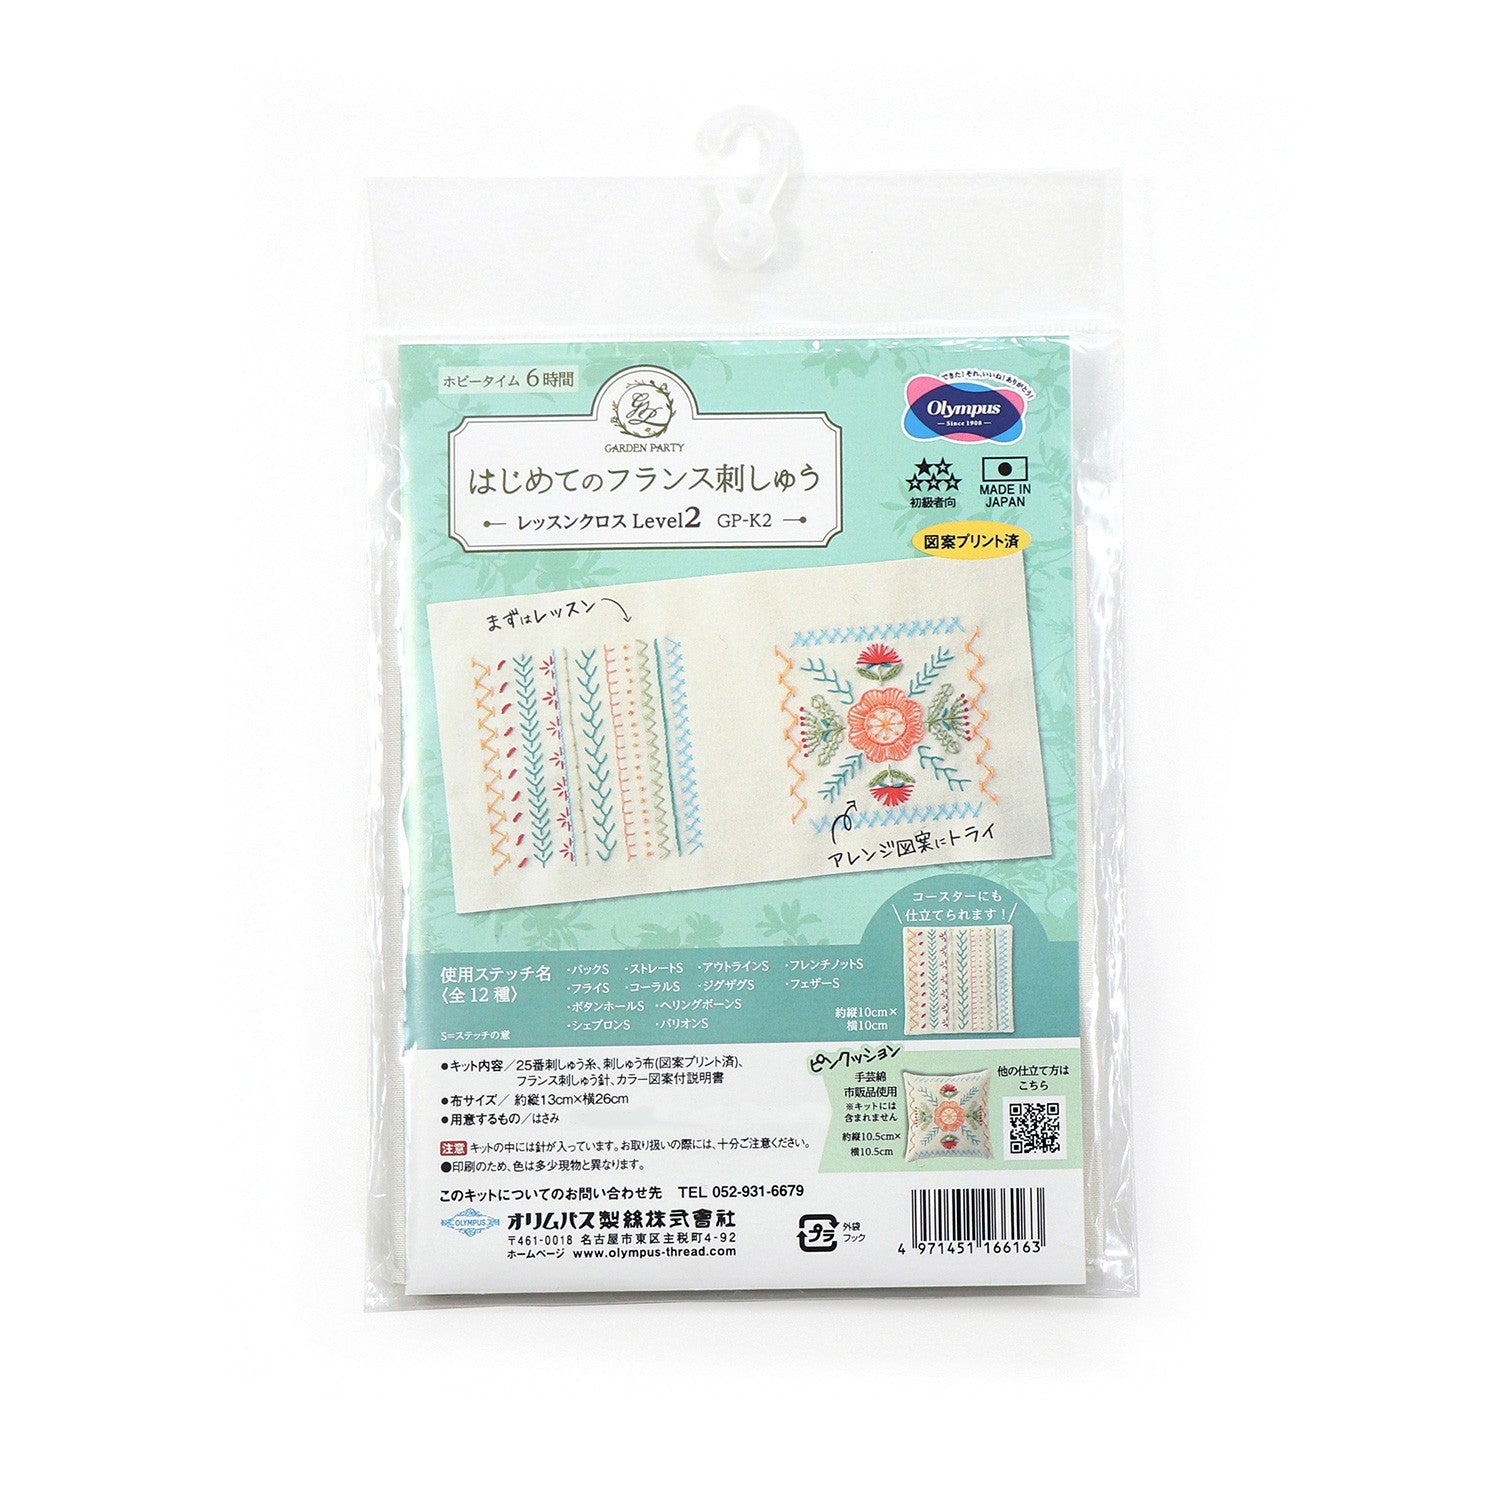 Garden Party Embroidery Lesson Kit - Level 2 - homesewn